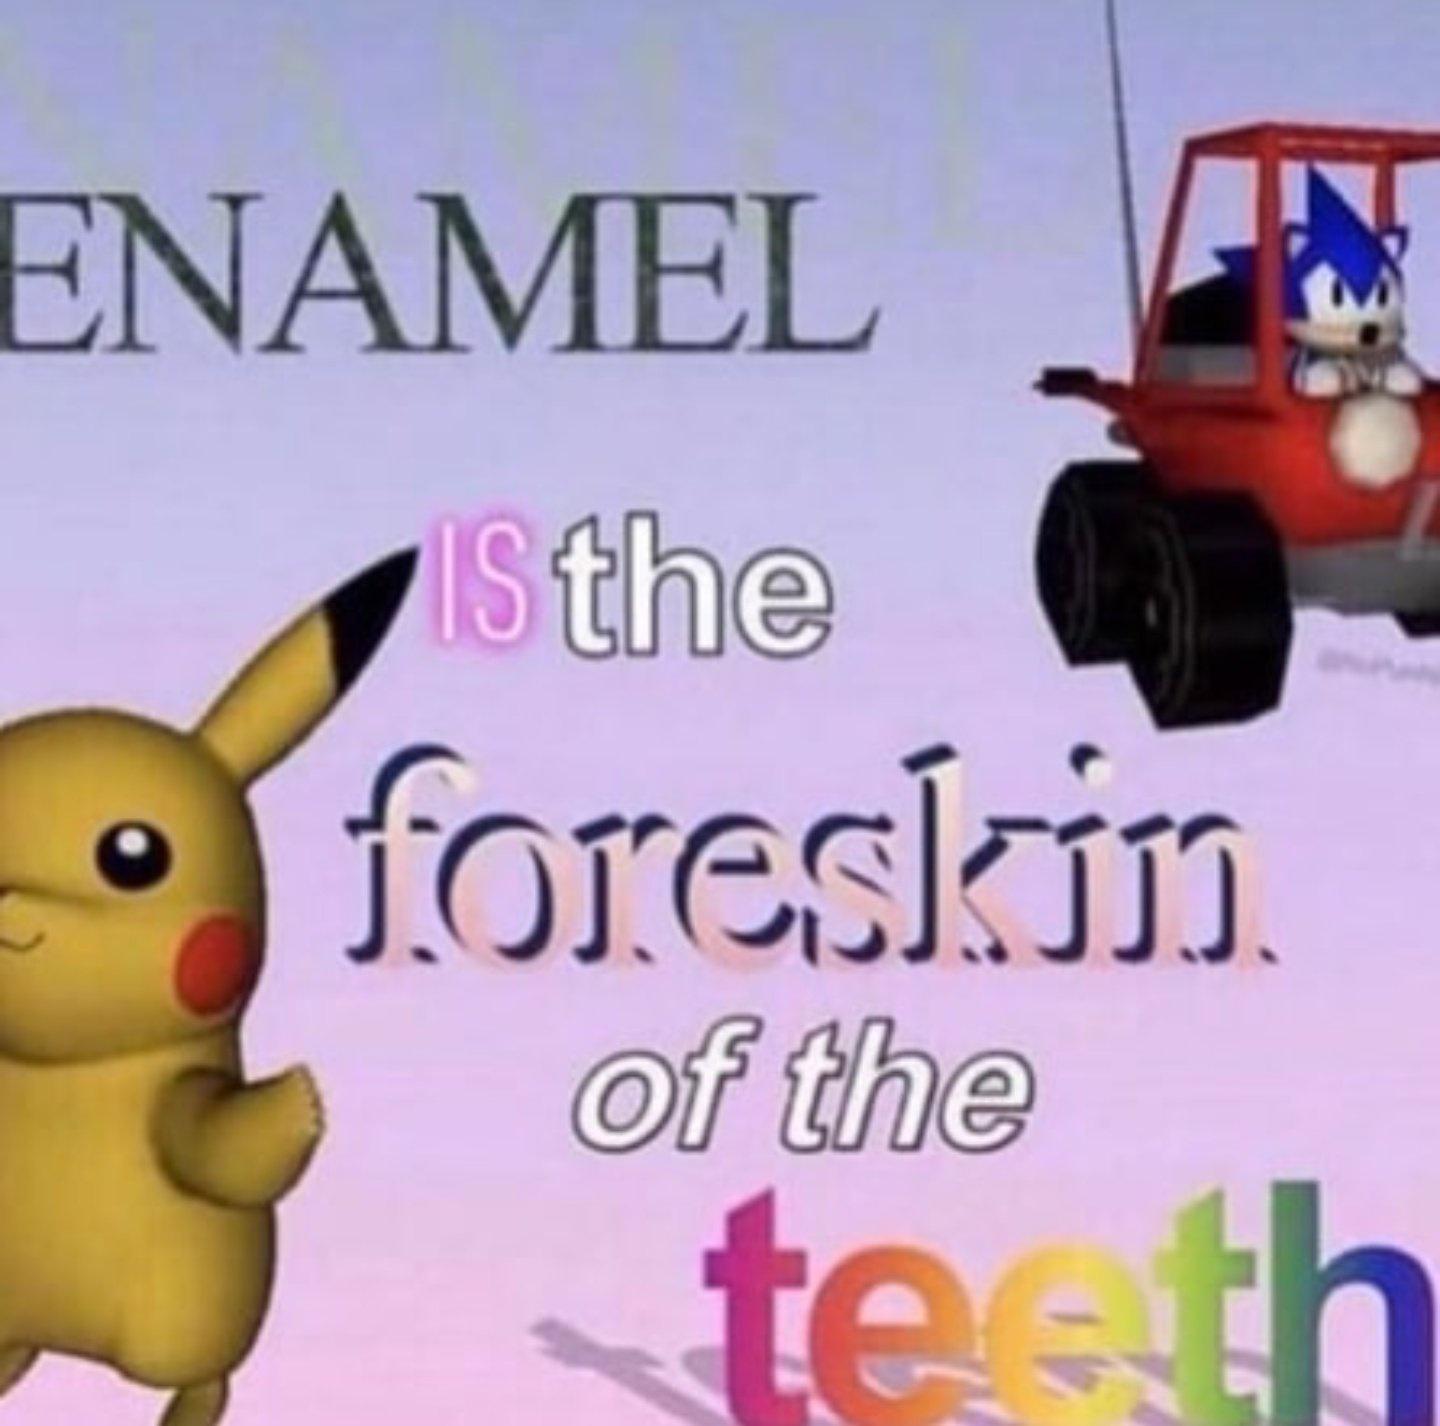 enamel is the foreskin of the teeth - Enamel Is the foreskis . of the t h